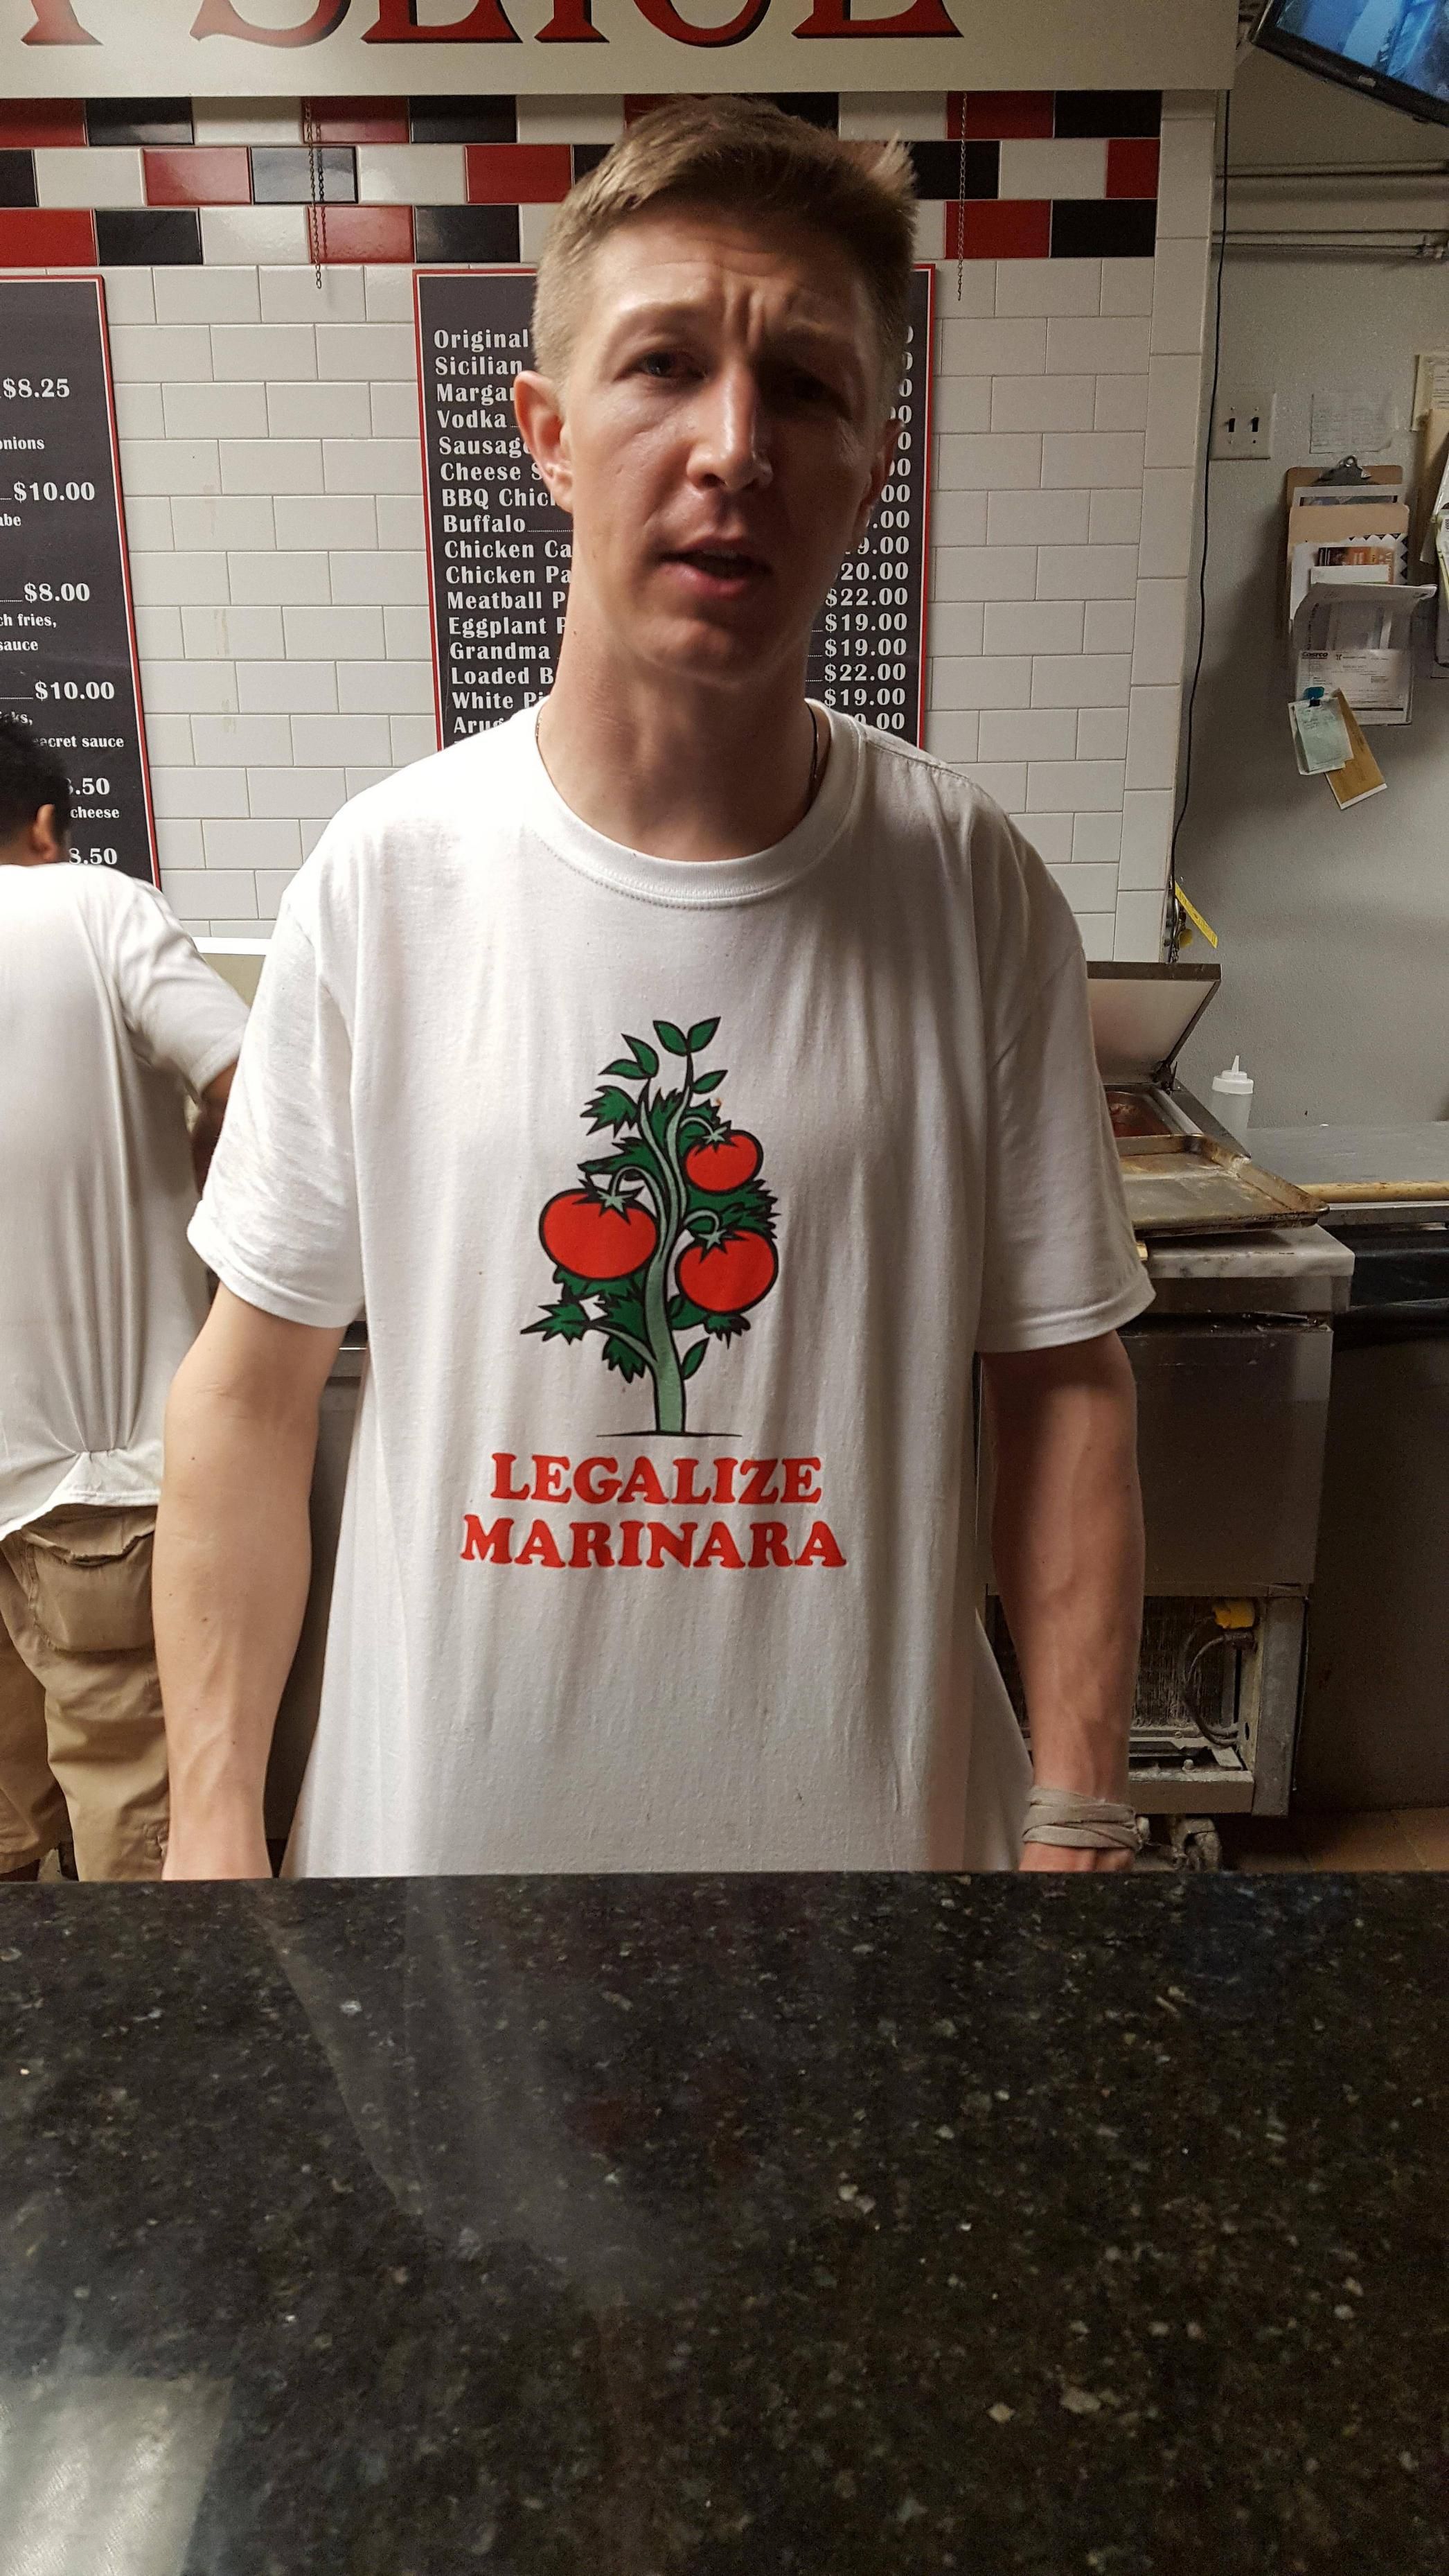 Seen at a pizza shop in New Jersey. The whole staff was wearing them. Photo taken with permission.